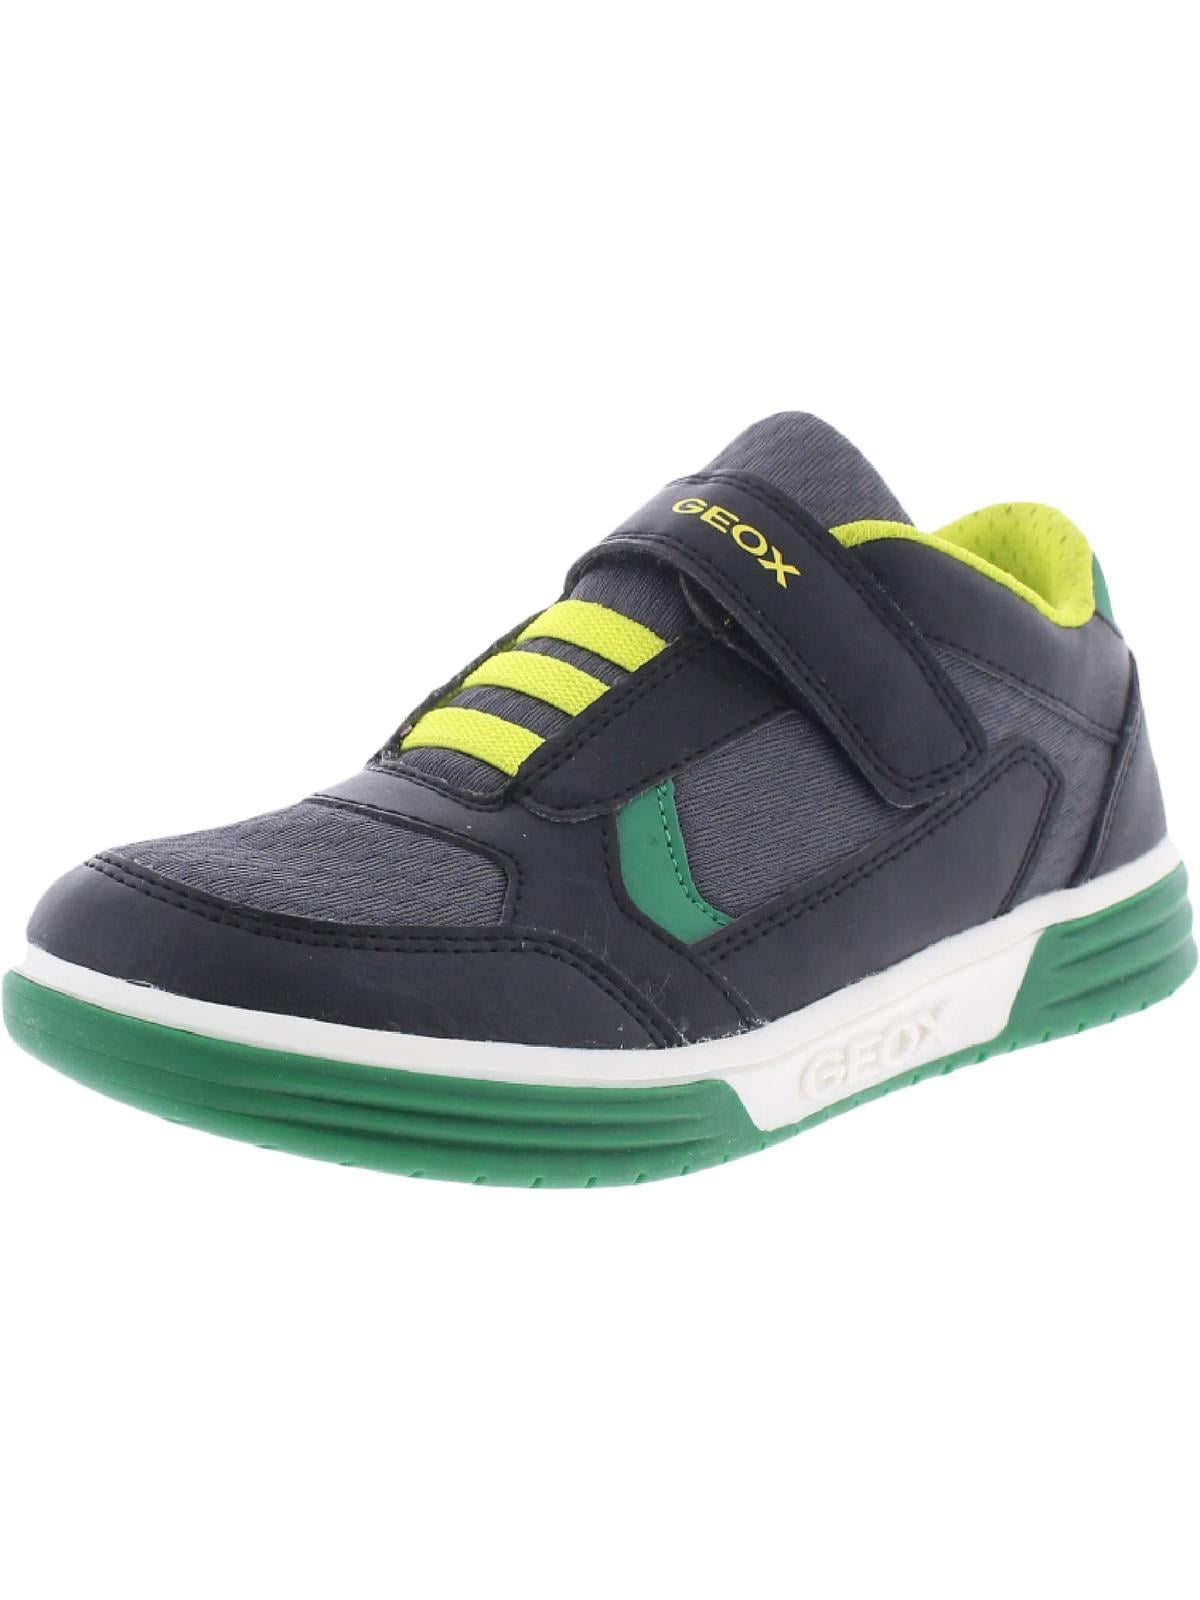 Geox Respira Boys Argonat Faux Leather Casual and Fashion Sneakers Black